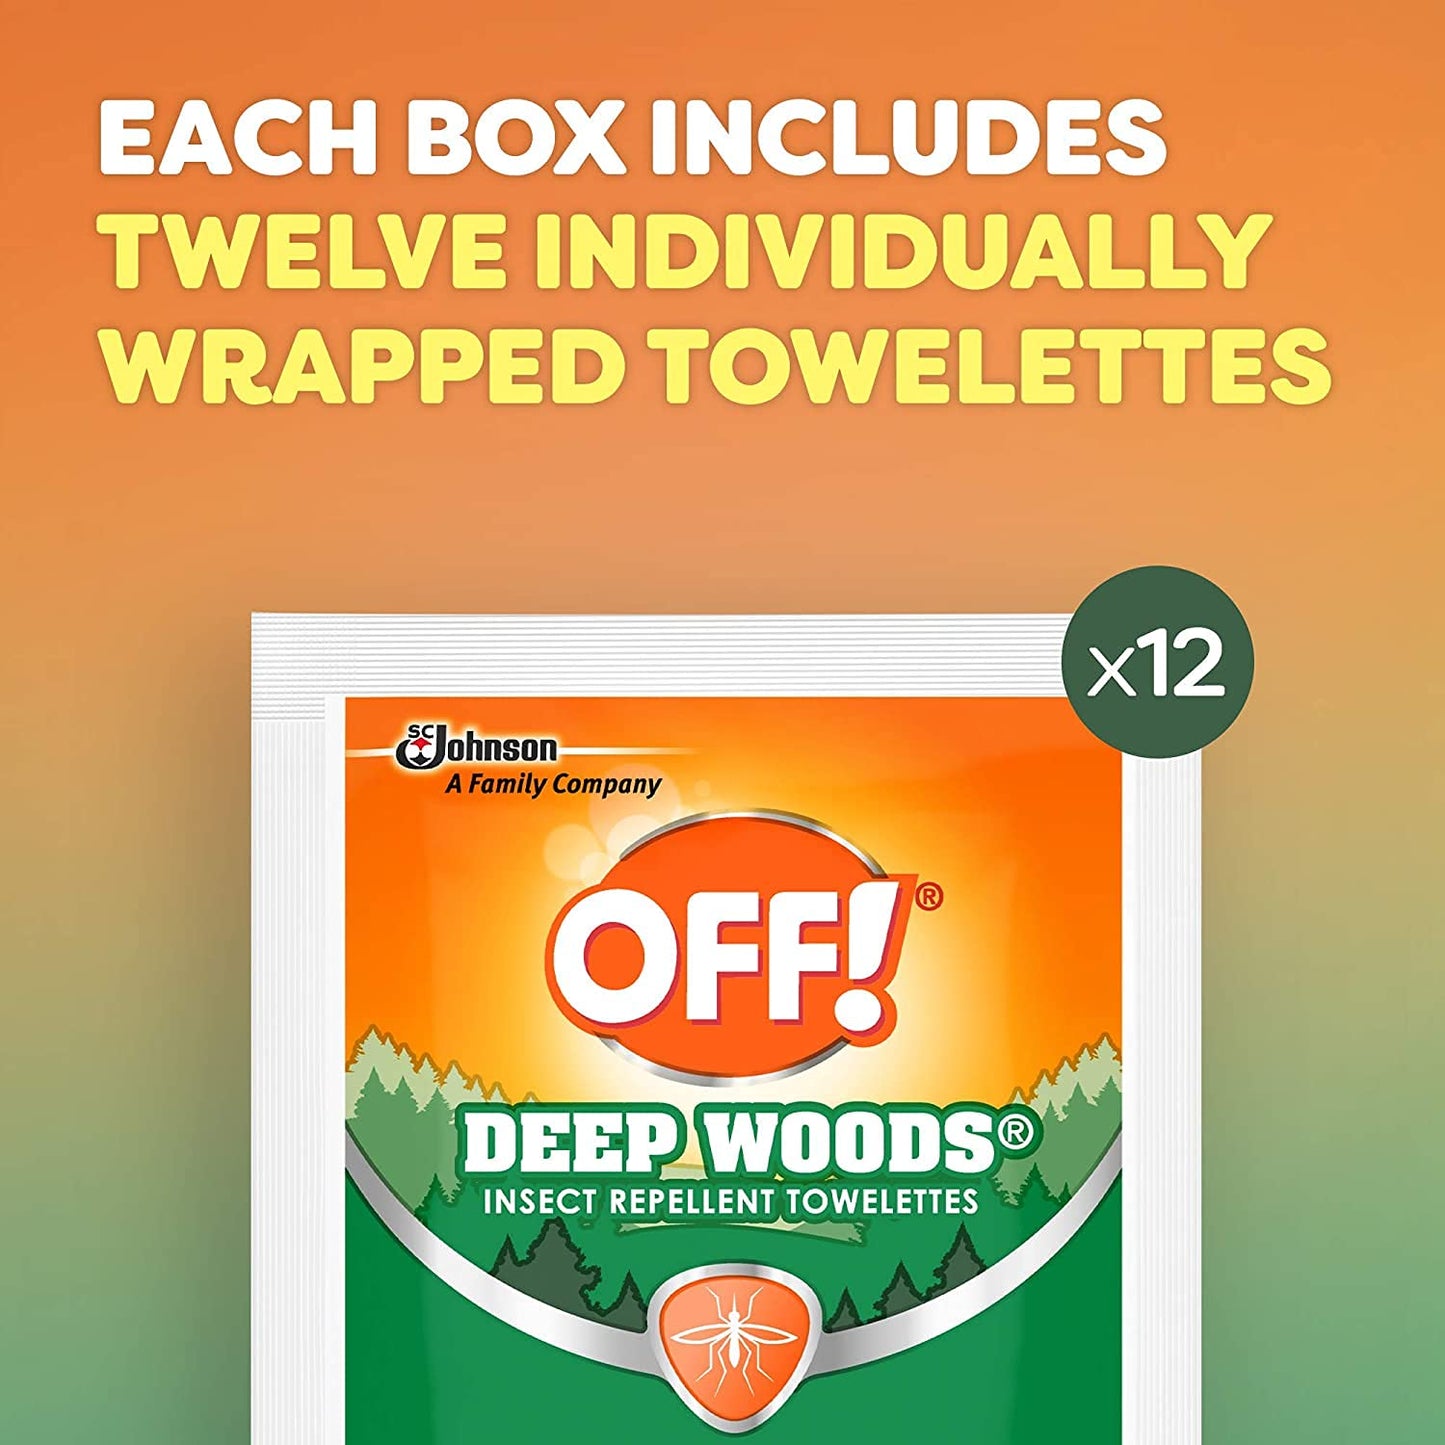 OFF! Deep Woods Insect Repellent Towelettes, Long Lasting Protection from Mosquitoes, Unscented, 12 Count Individually Wrapped Wipes